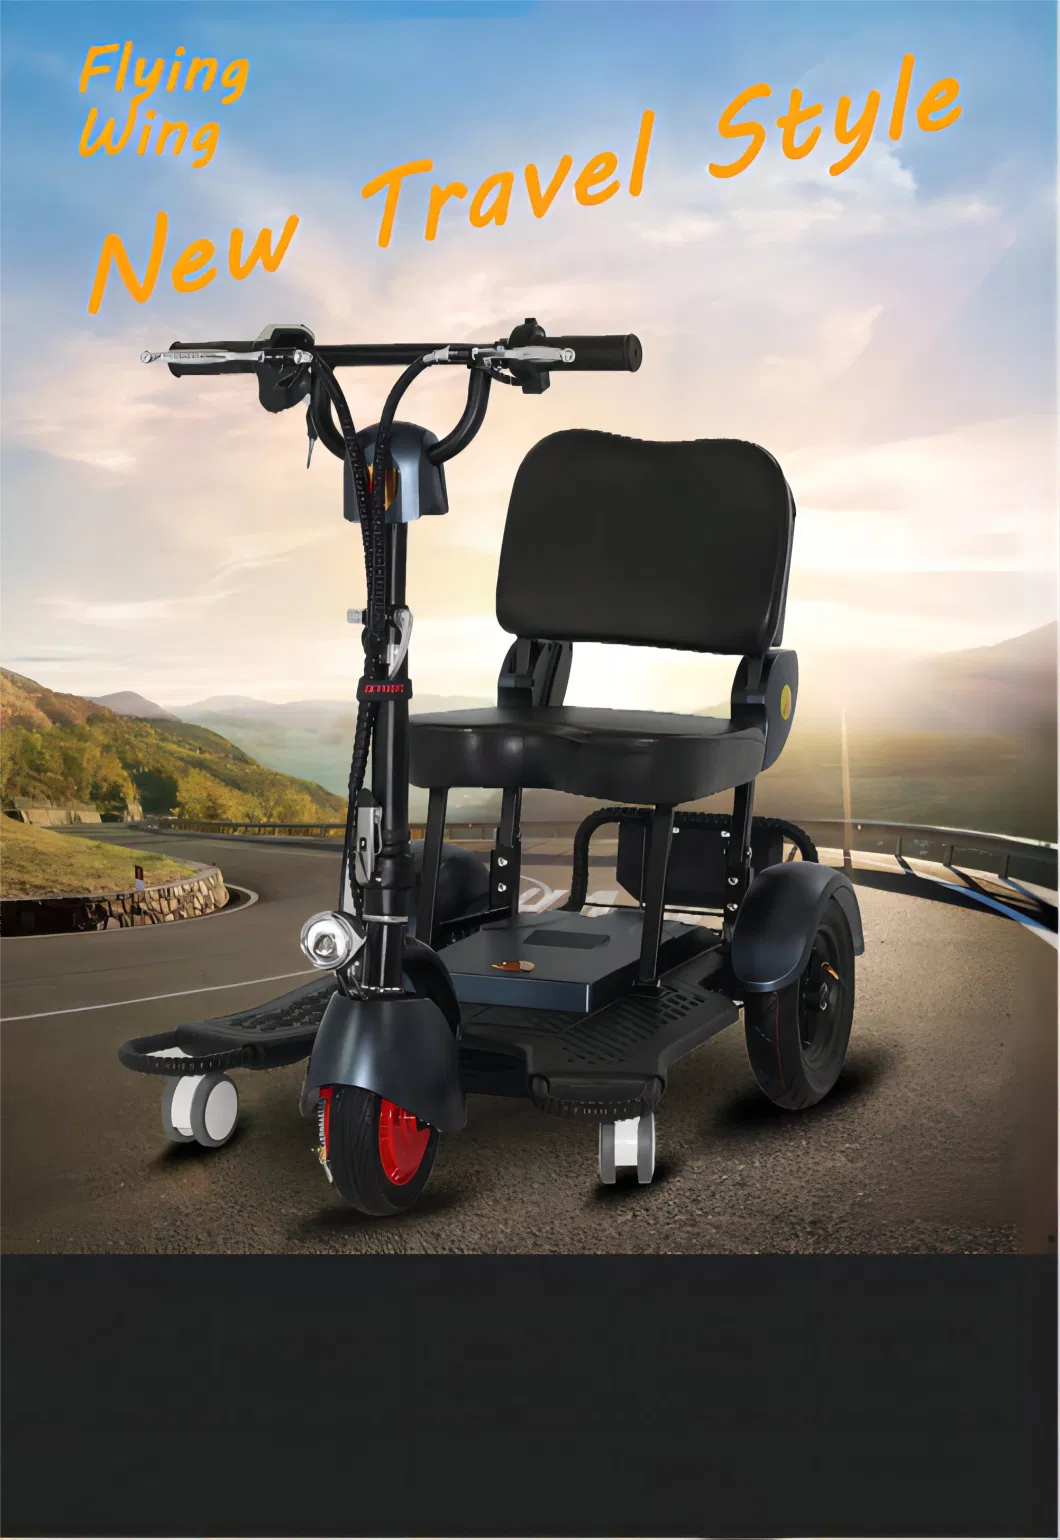 Foldable 3 Wheel Mobility Scooter Tricycle Adult Electric for Disabled People Elderly Handicapped Scooters